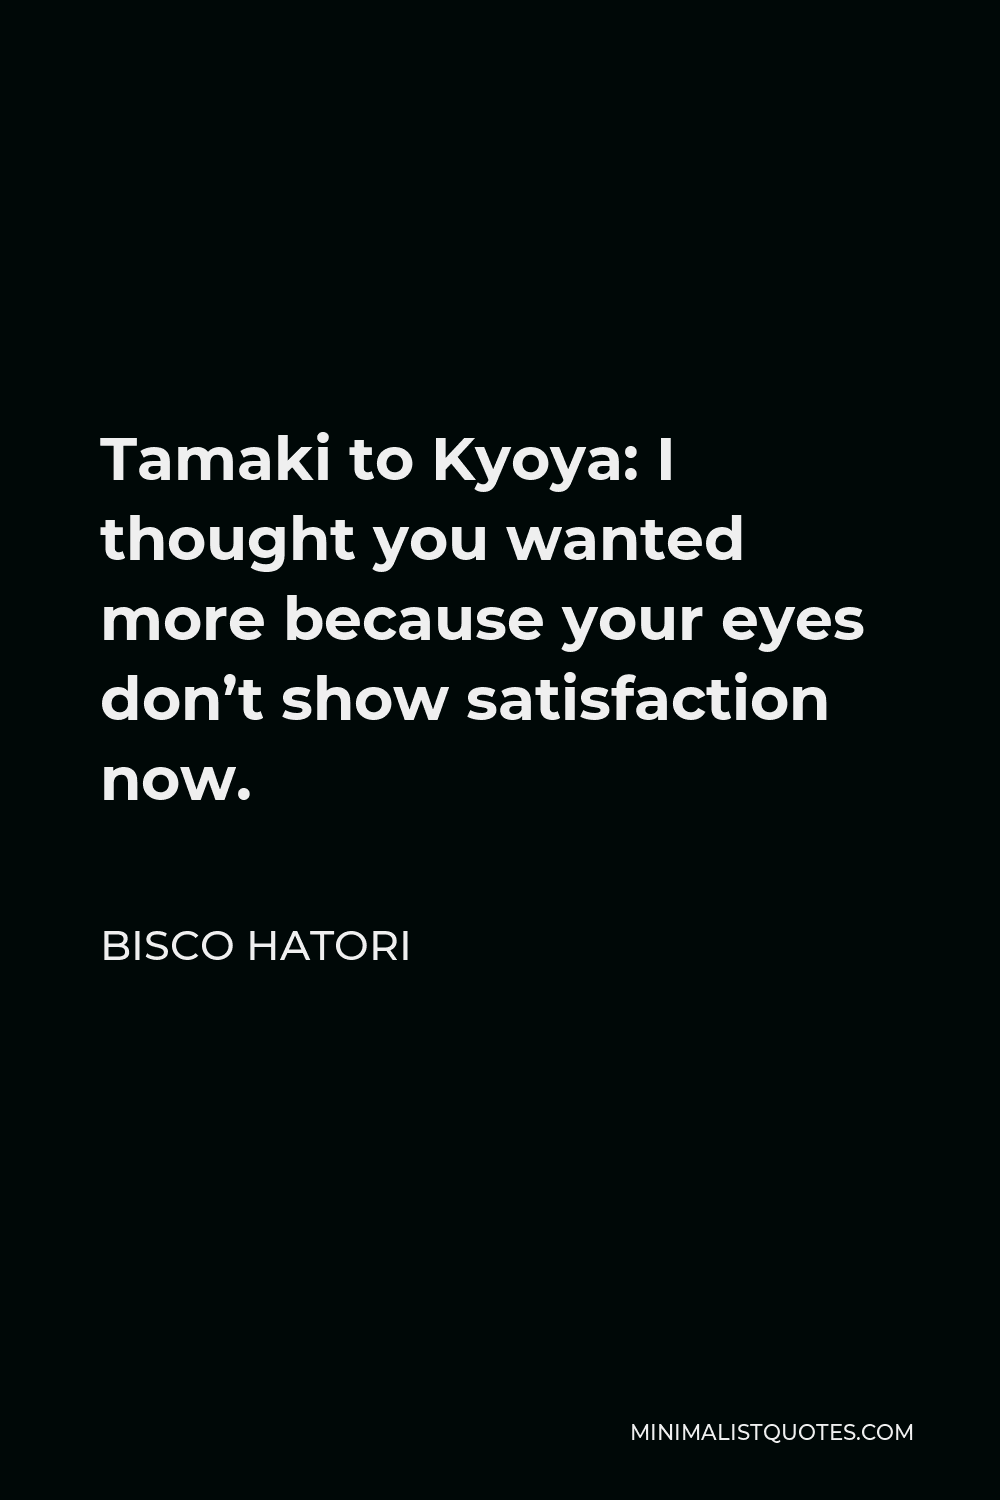 Bisco Hatori Quote - Tamaki to Kyoya: I thought you wanted more because your eyes don’t show satisfaction now.